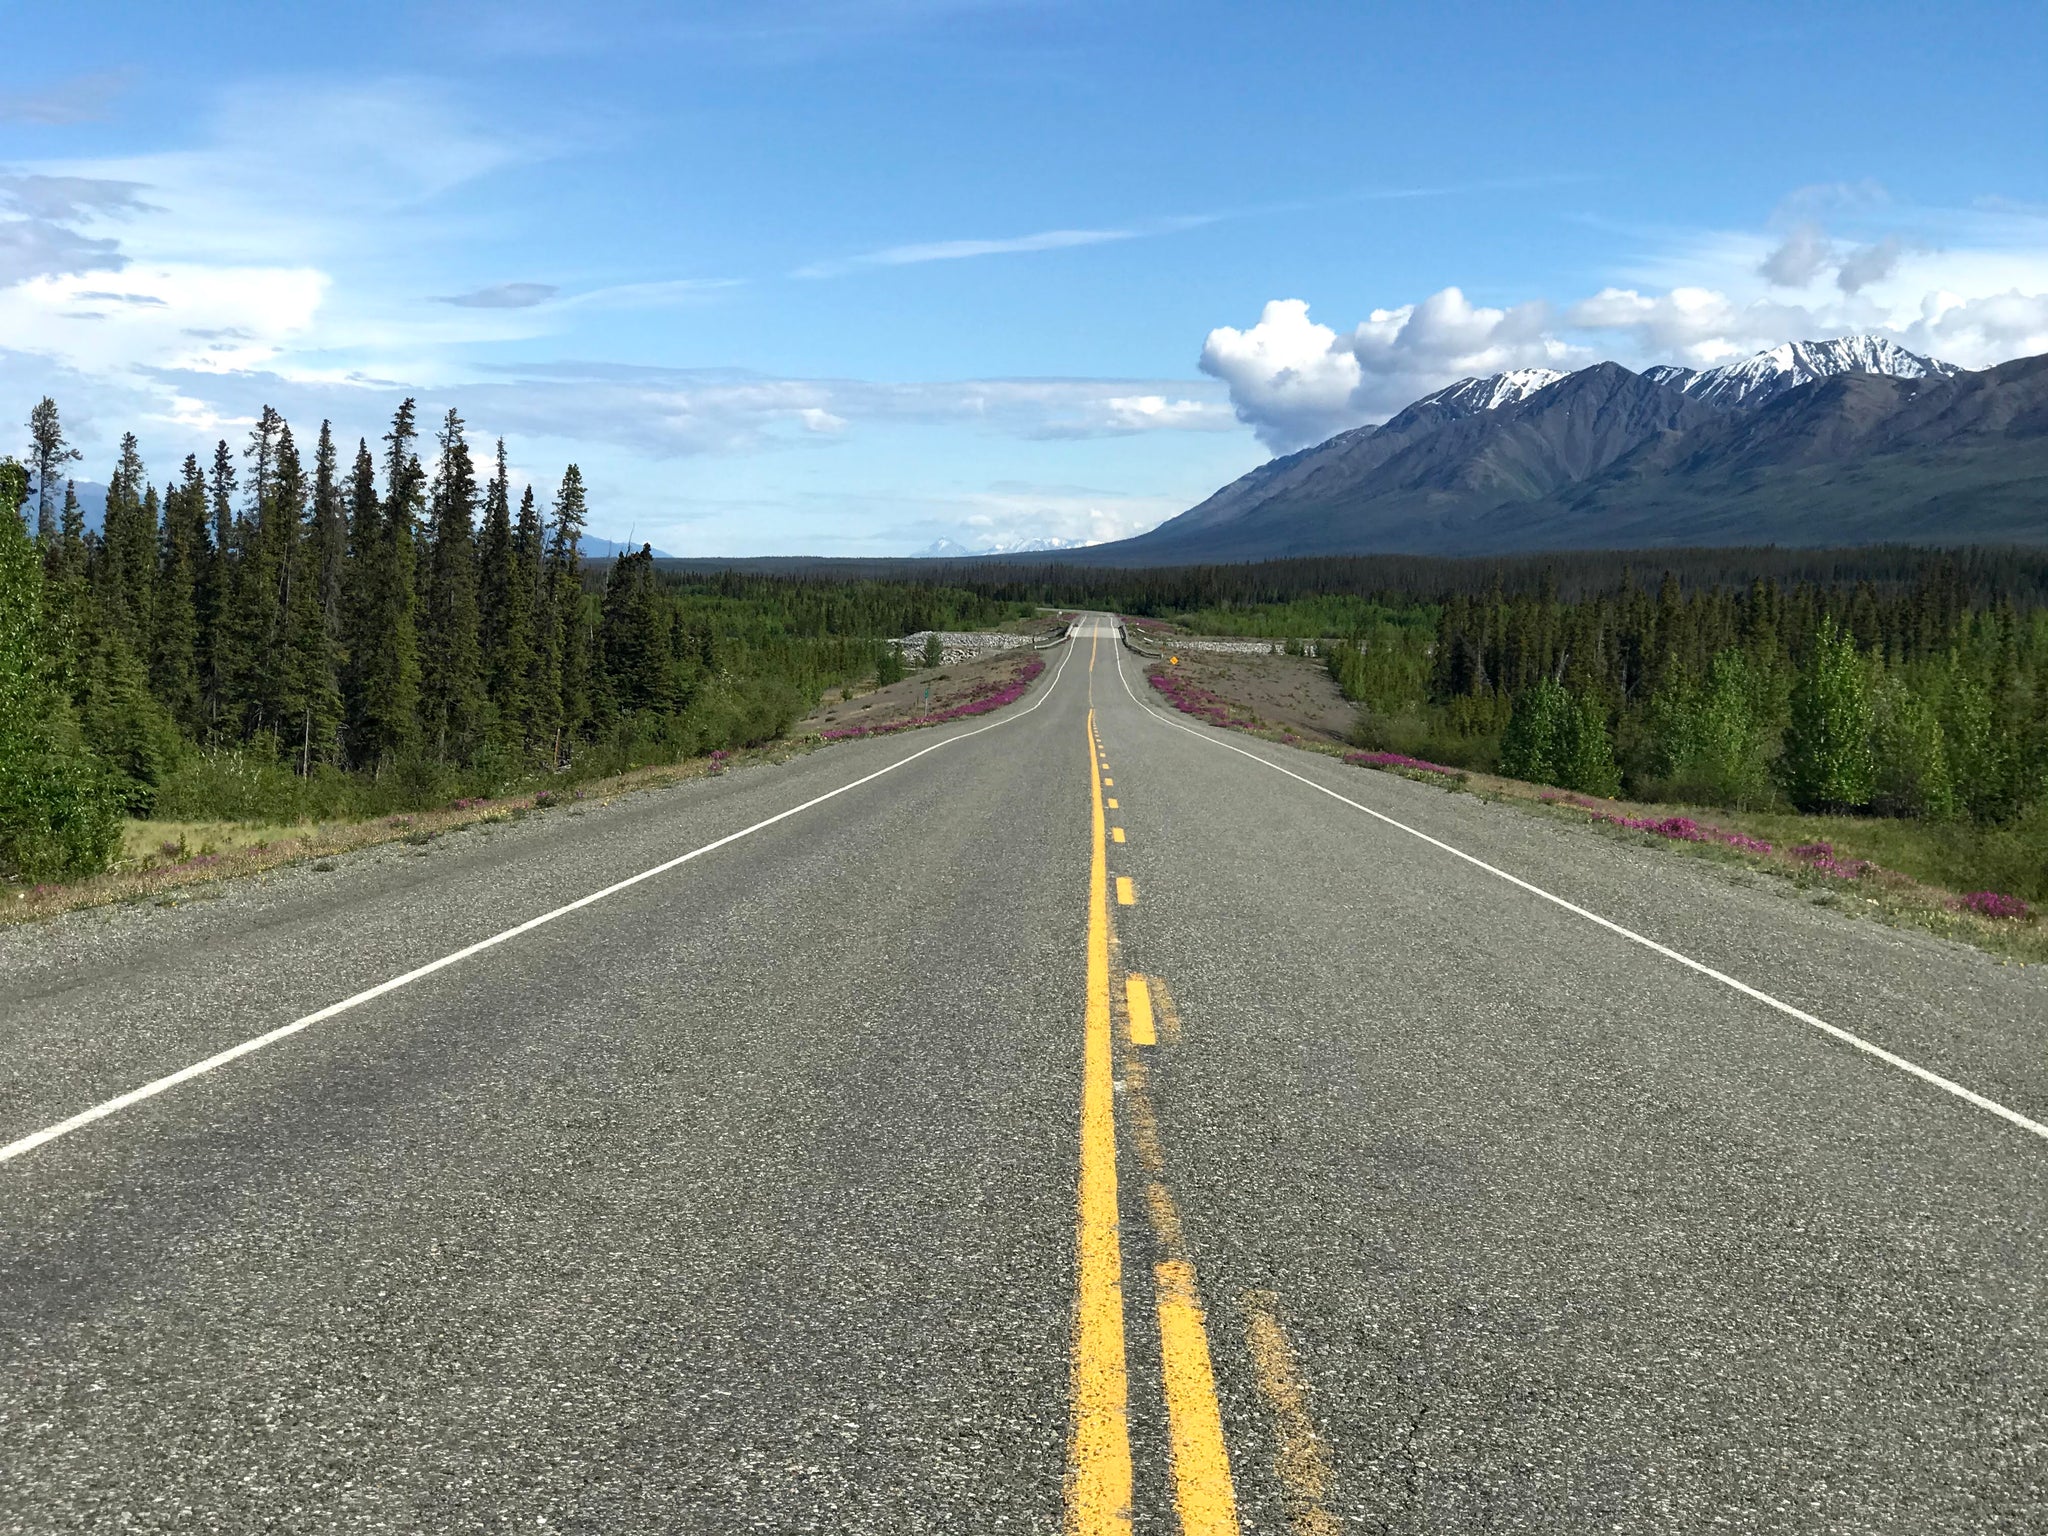 Sunny day on the Alcan Highway